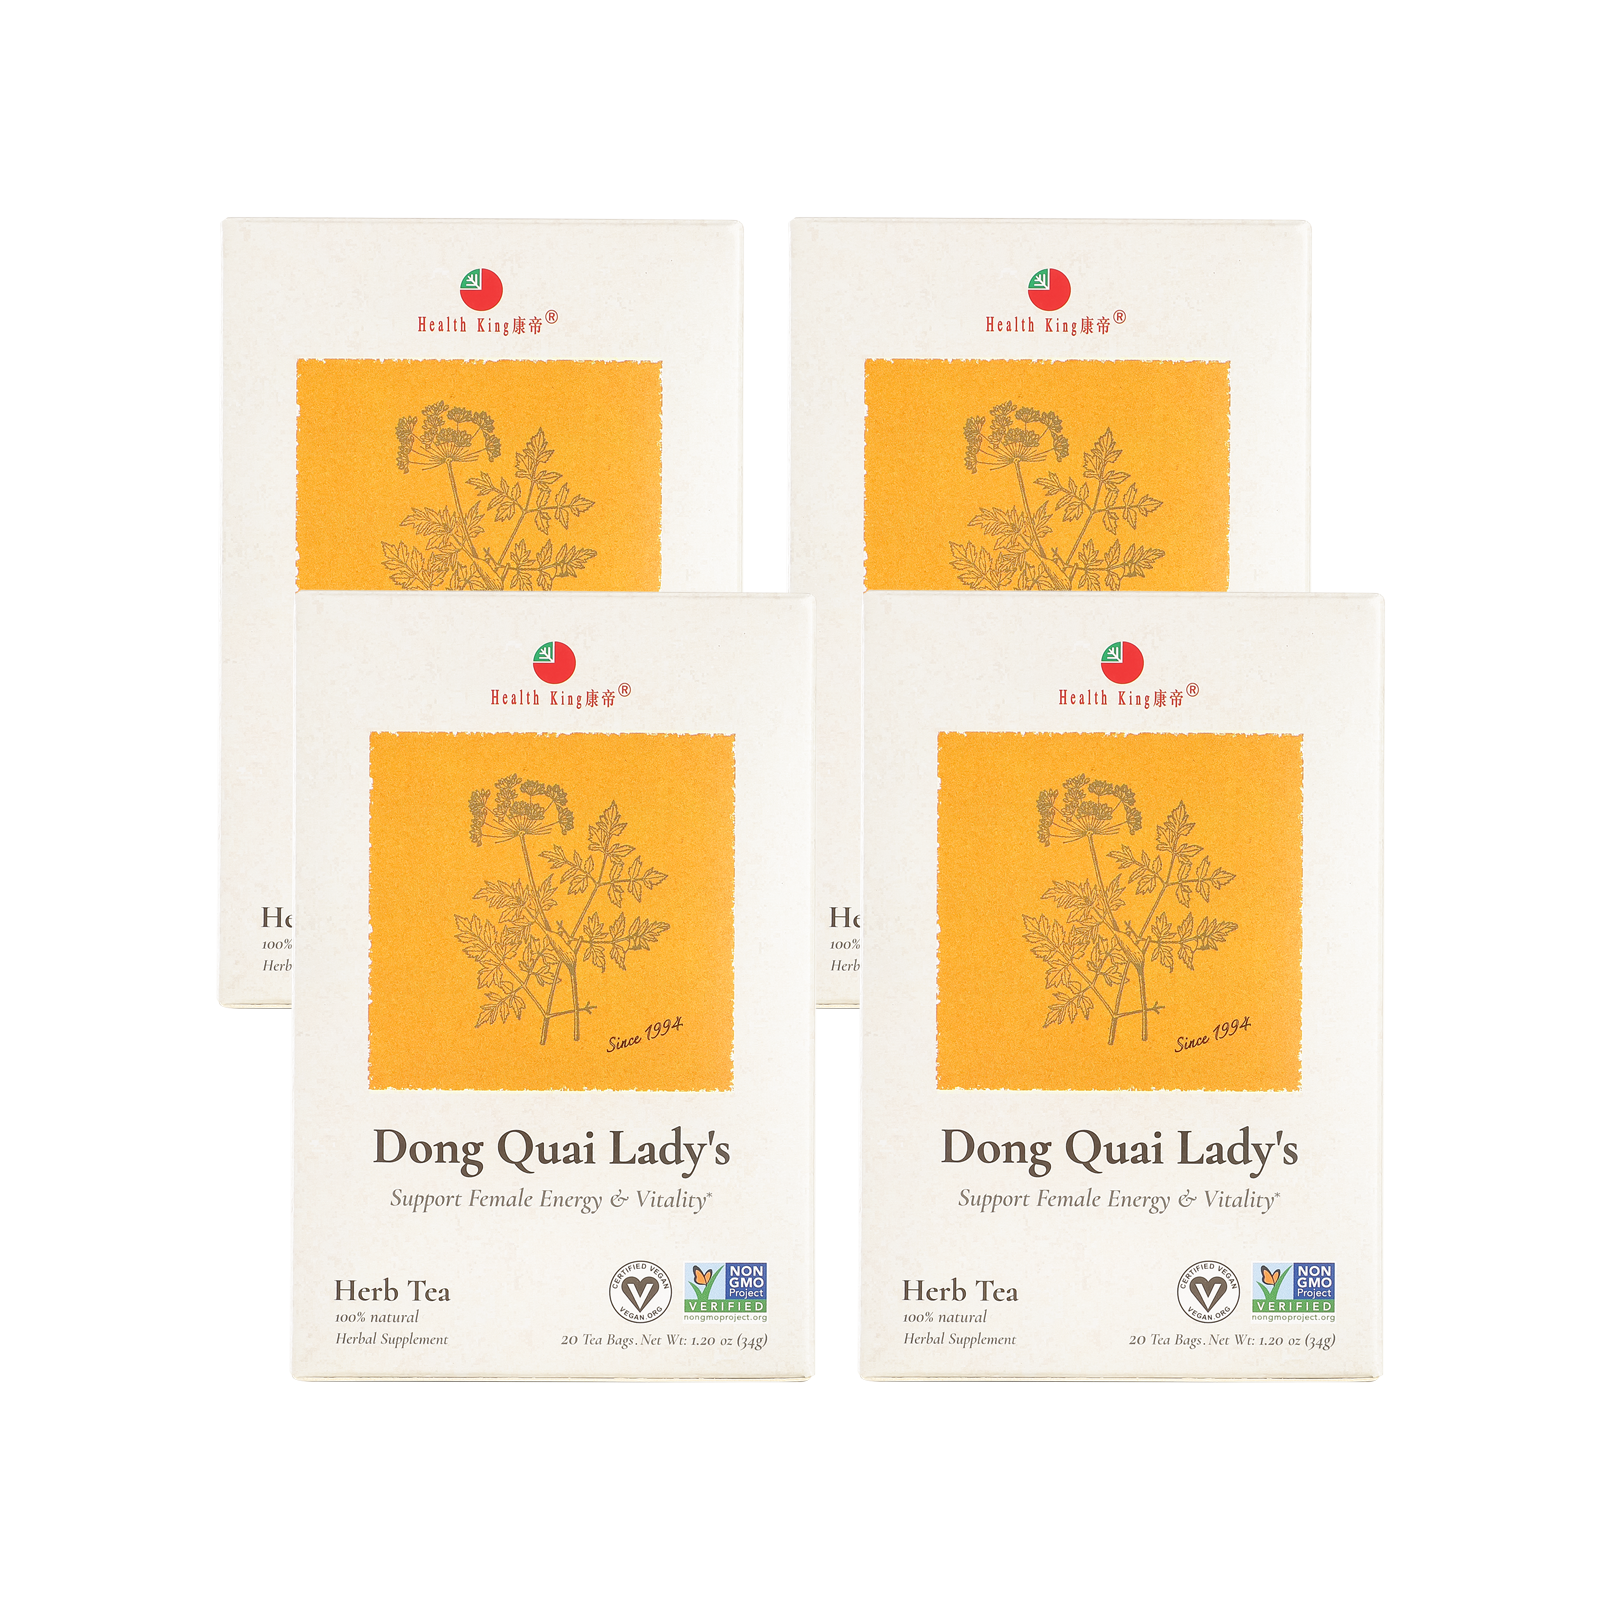 Four of Dong Quai Lady's Herb Tea packages for menstrual comfort